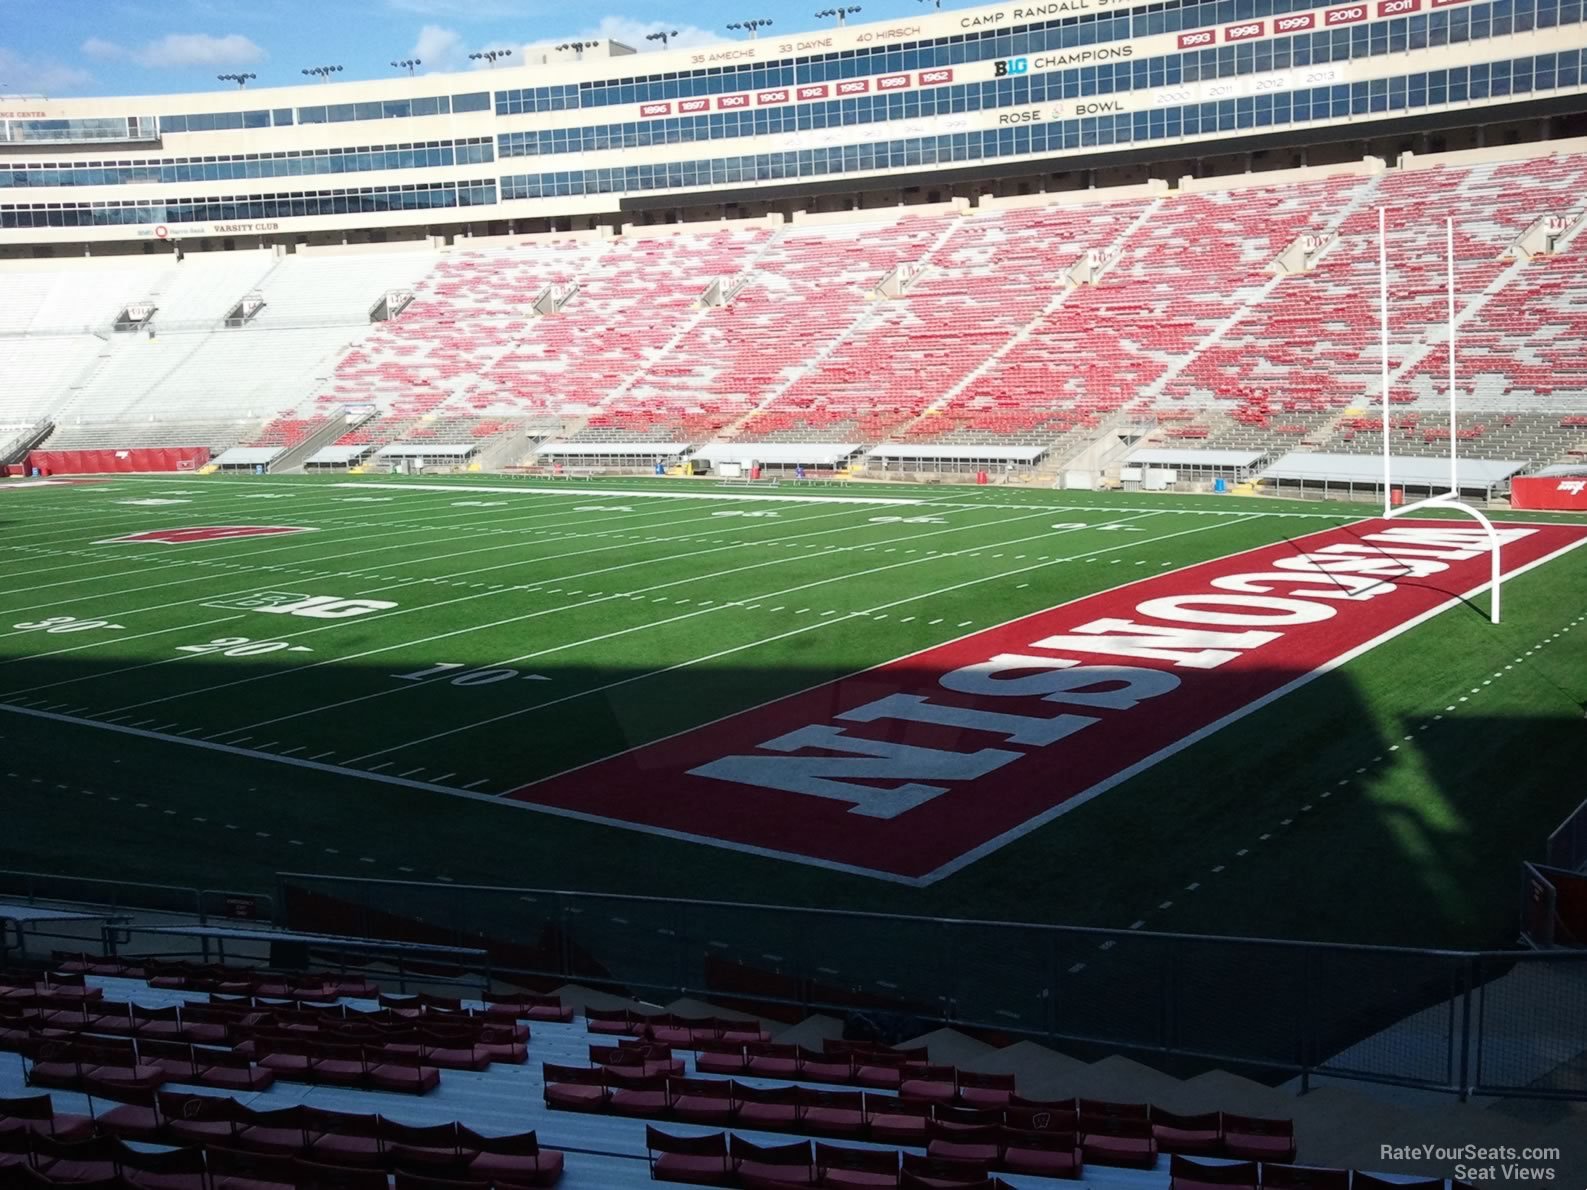 section a, row 30 seat view  - camp randall stadium